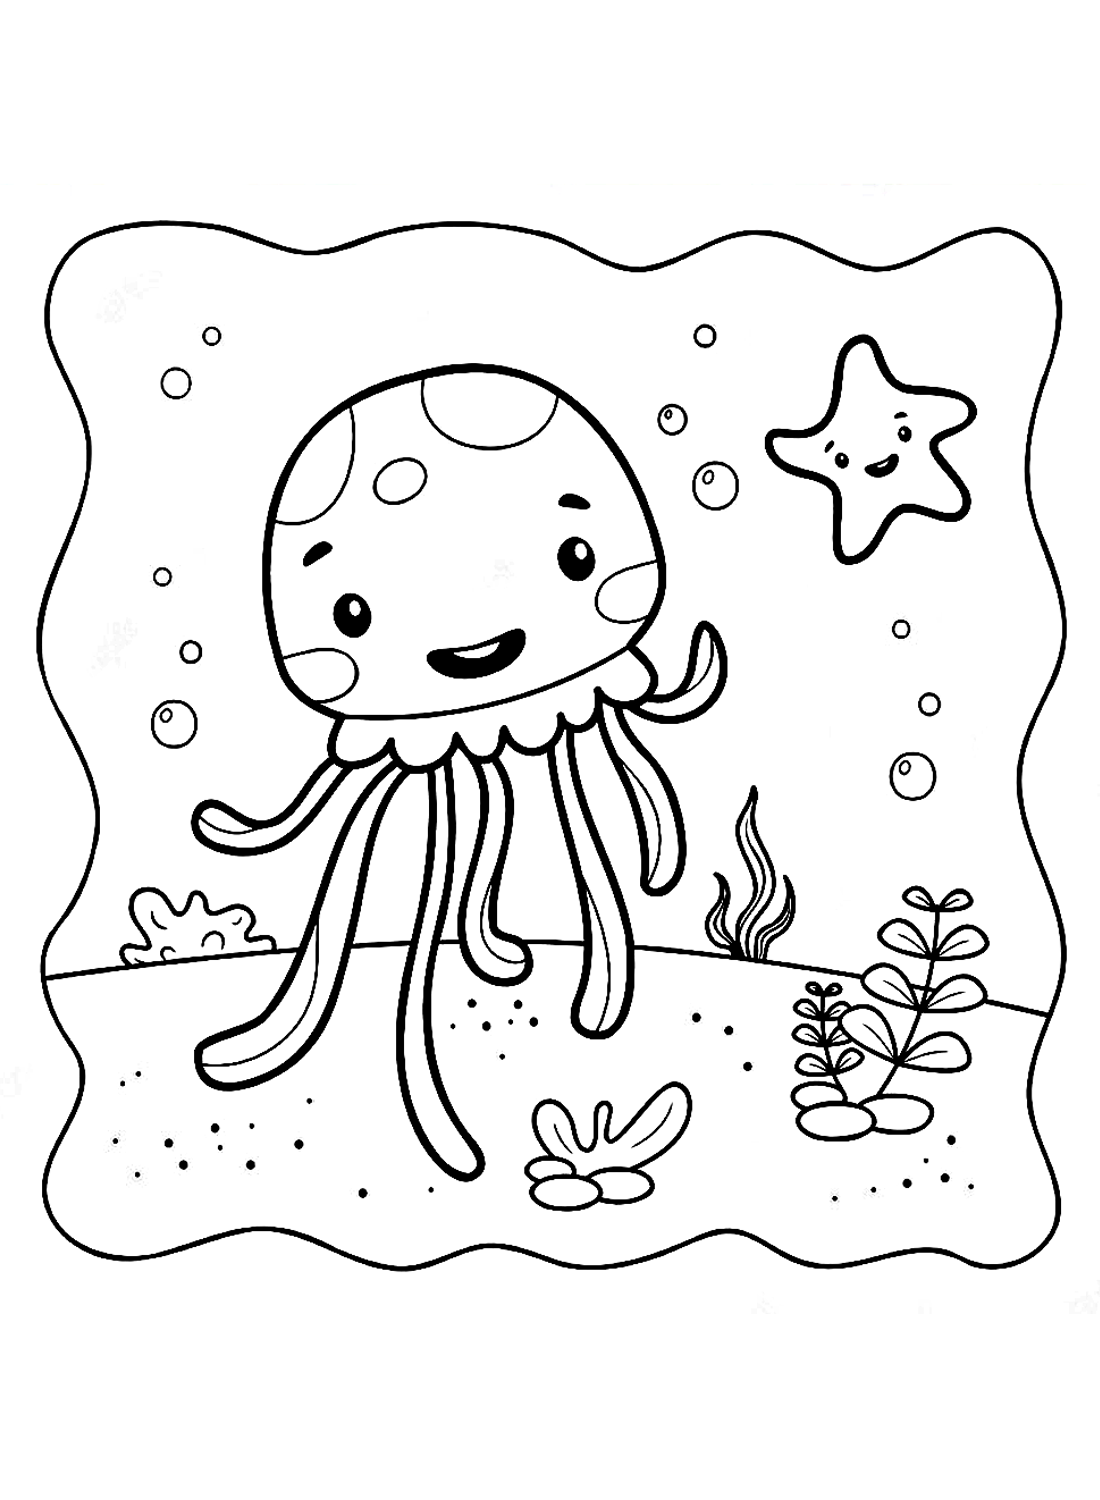 A lovely Jellyfish Coloring Page